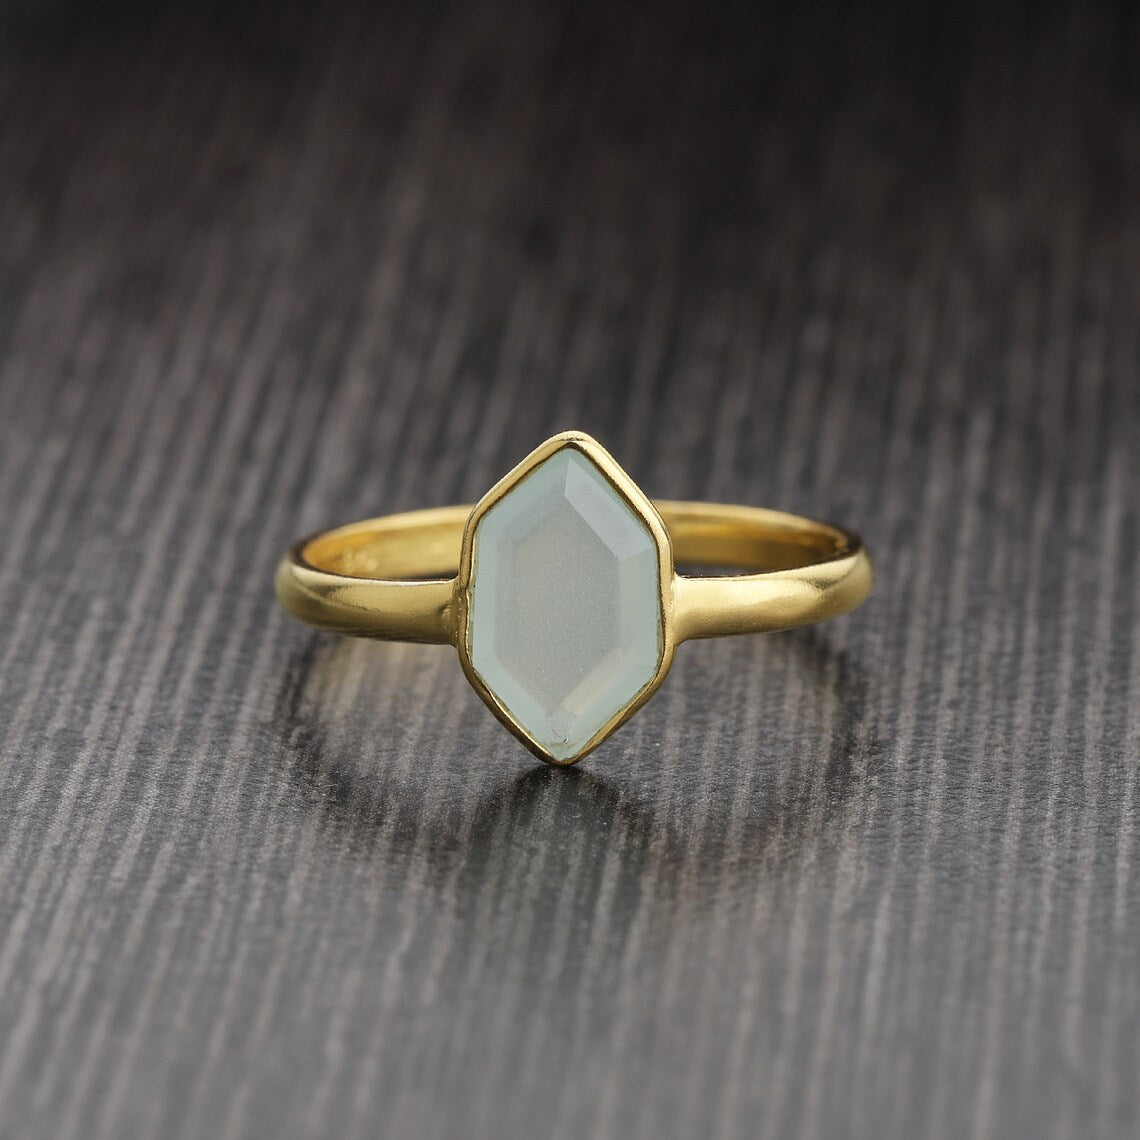 Gold Plated on 925 Sterling Silver - Aqua Chalcedony Gold Plated Ring, Chalcedony Minimalist Ring - Birthstone Ring